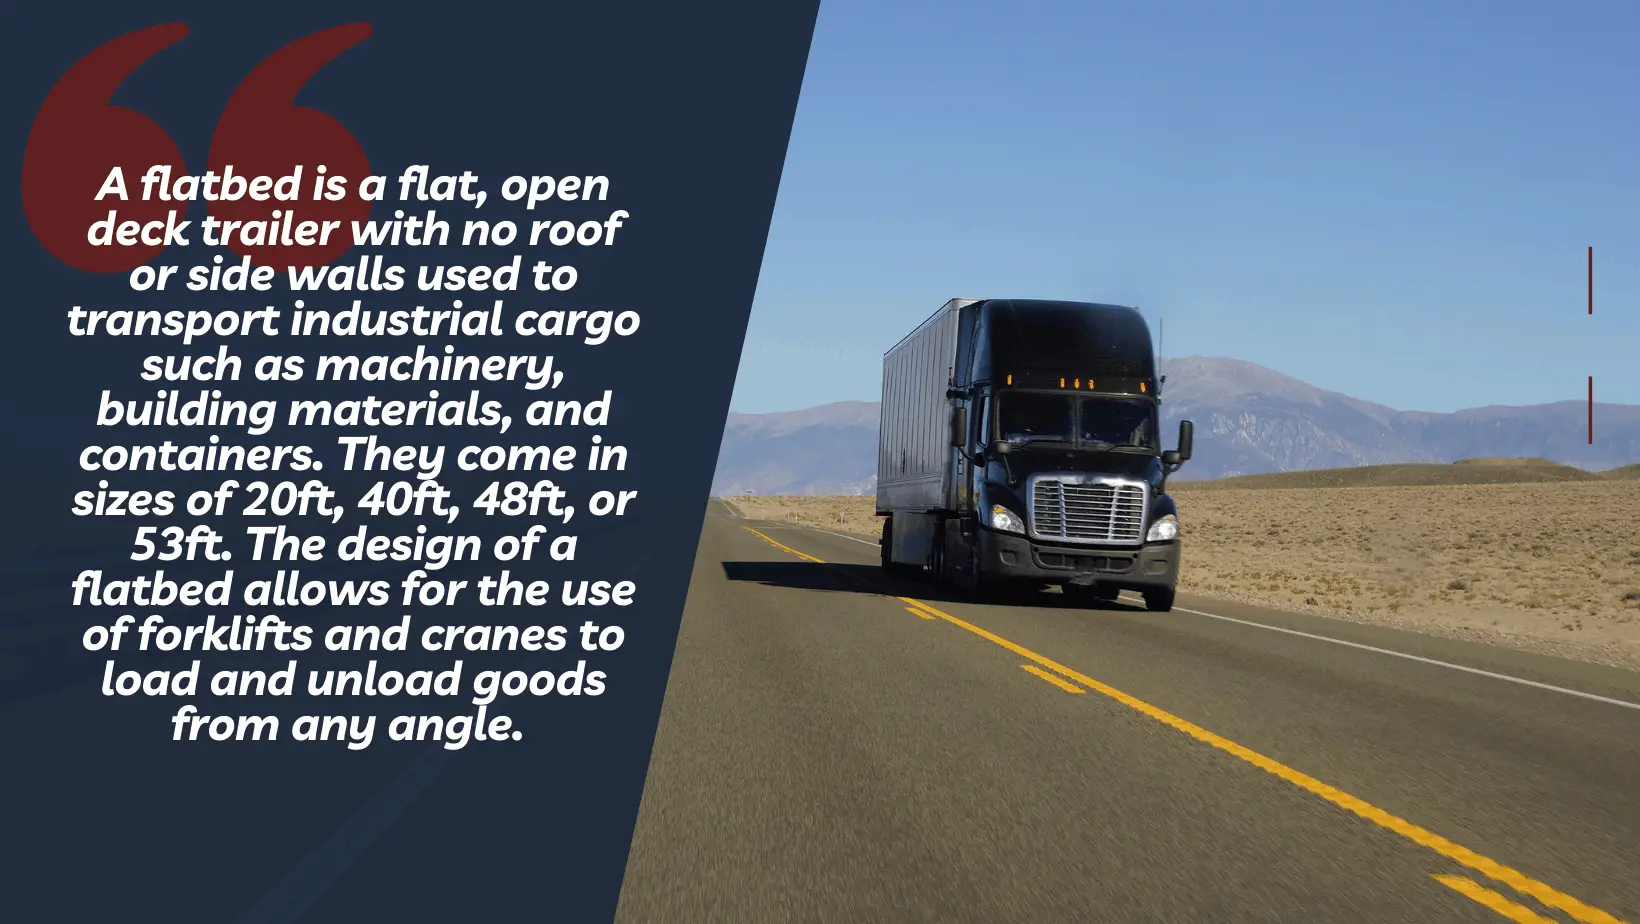 What Is a Flatbed Trailer?